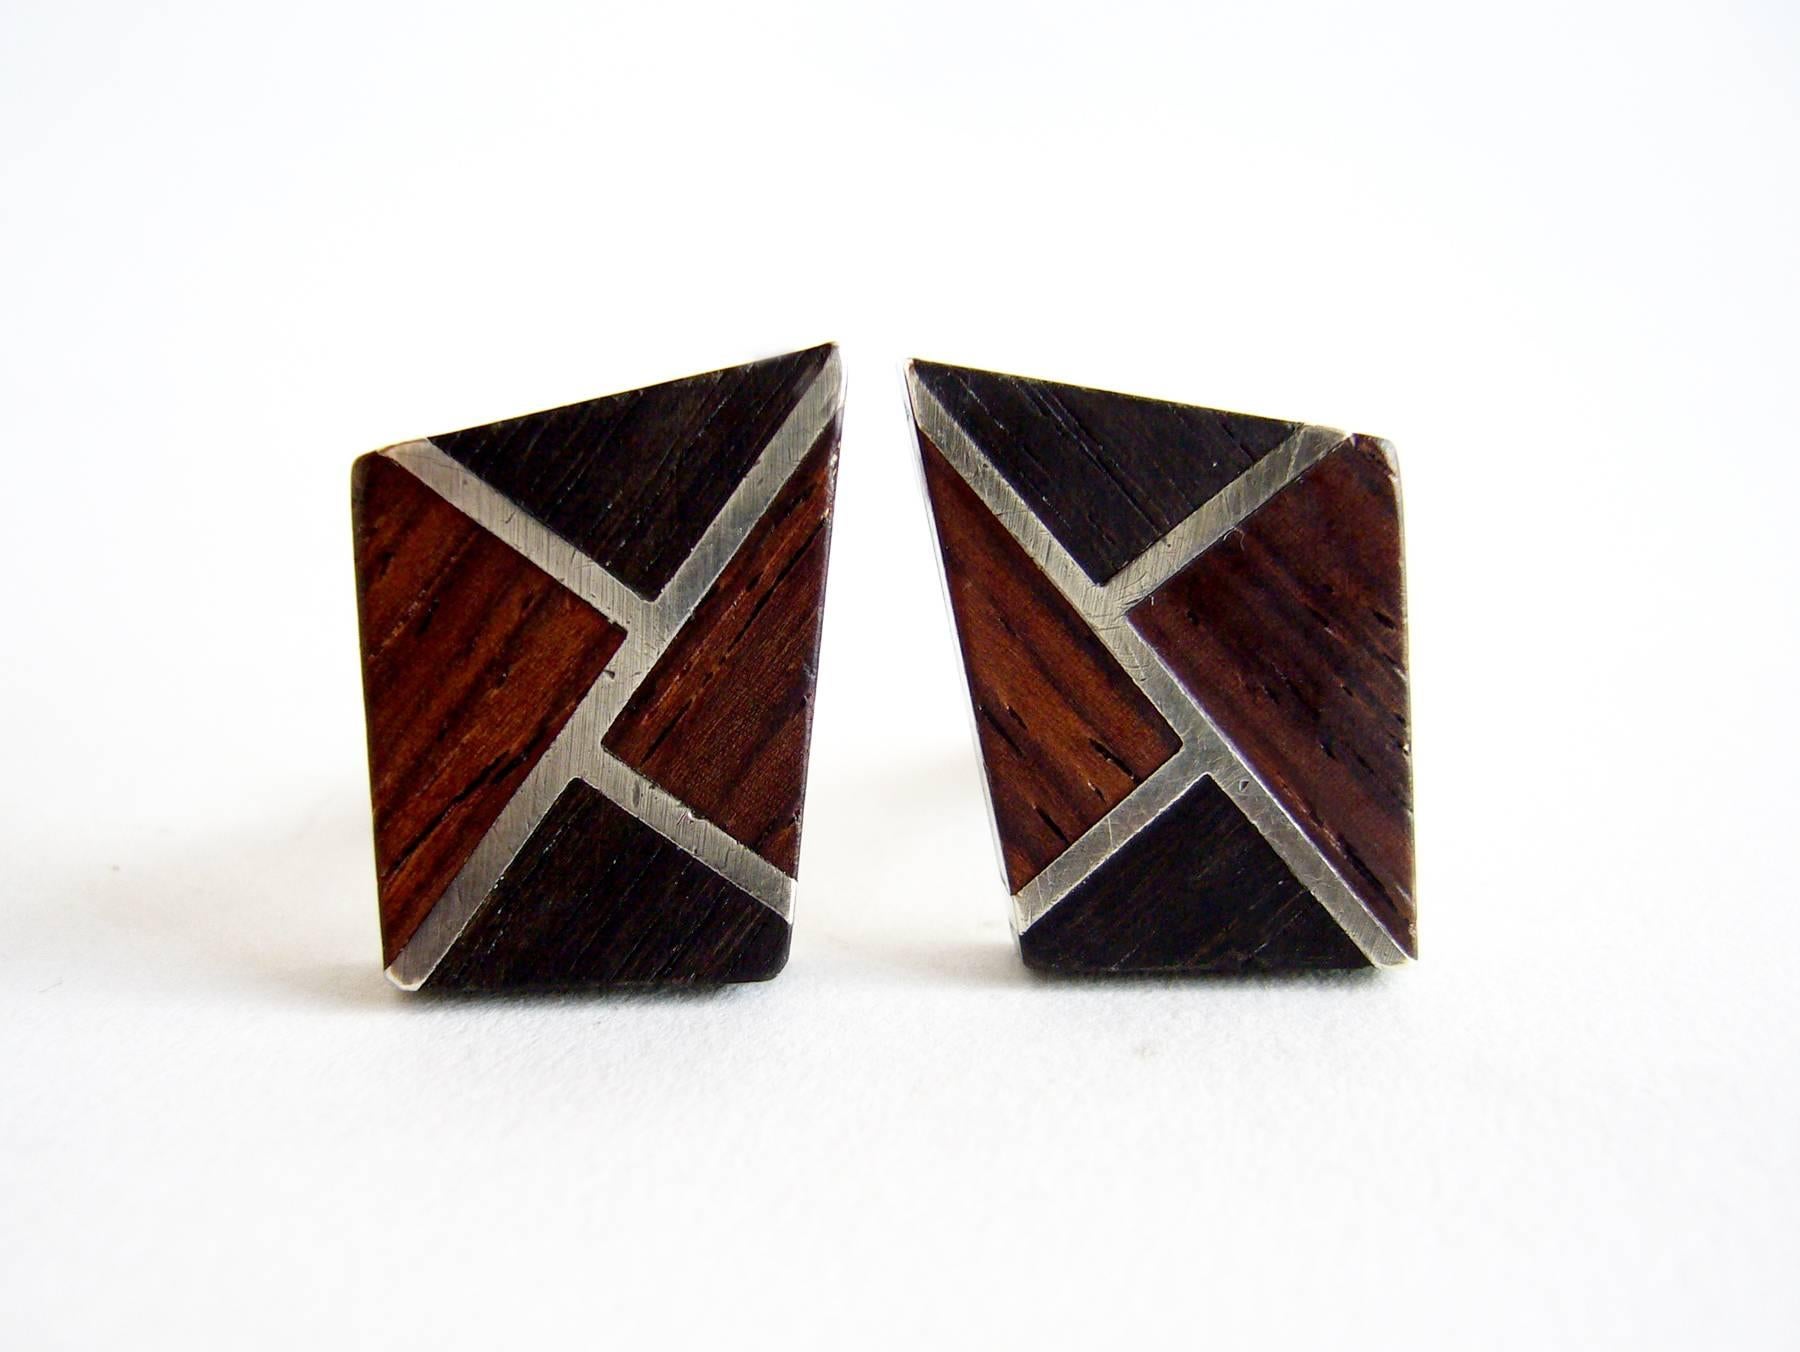 Sterling silver and exotic wood cufflinks designed by Esther Lewittes of Los Angeles, California.  Cufflinks measure 7/8